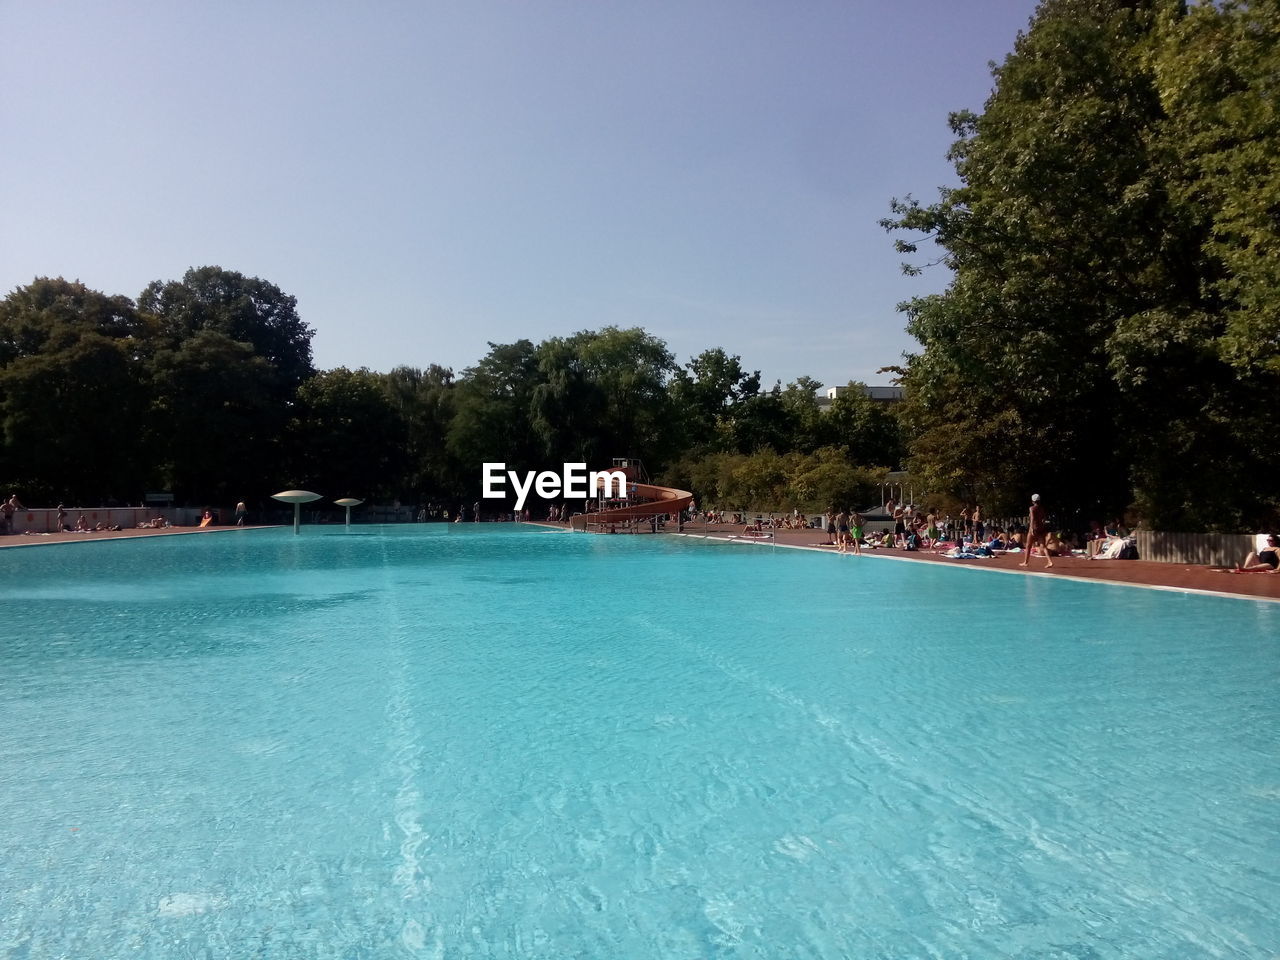 Swimming pool by trees against clear sky